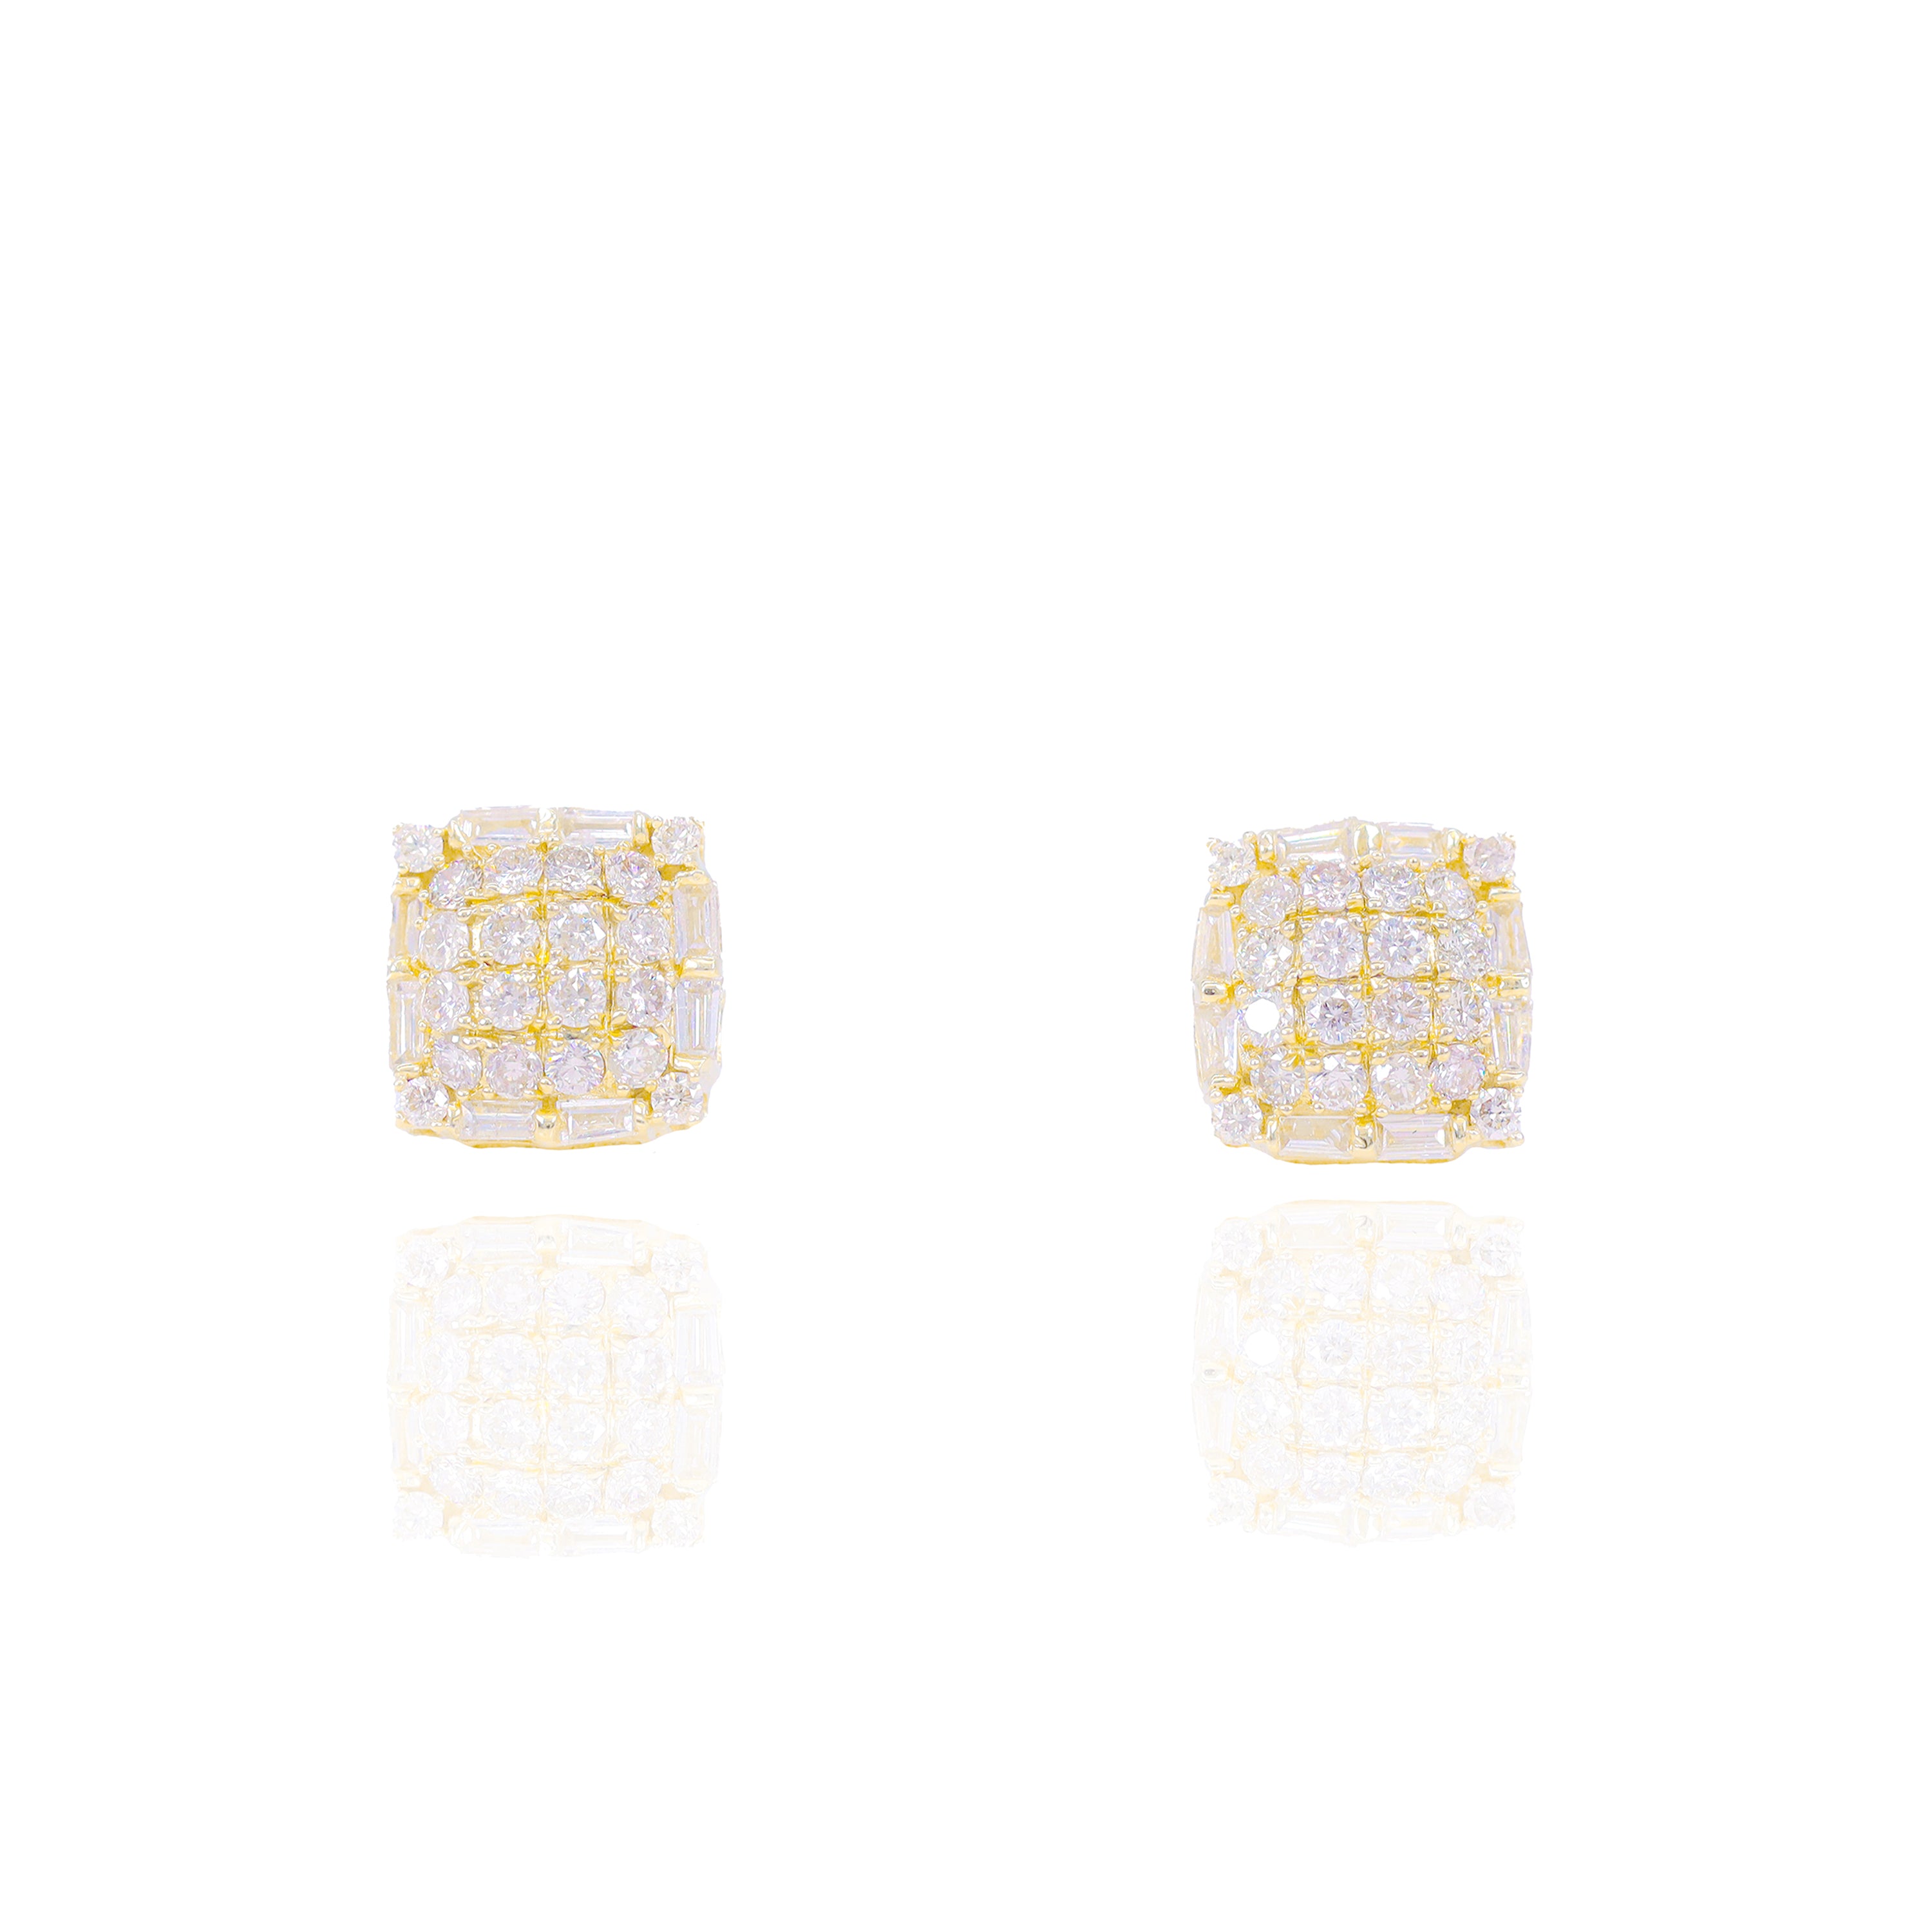 Square Shape Diamond Earrings with Baguette Sides